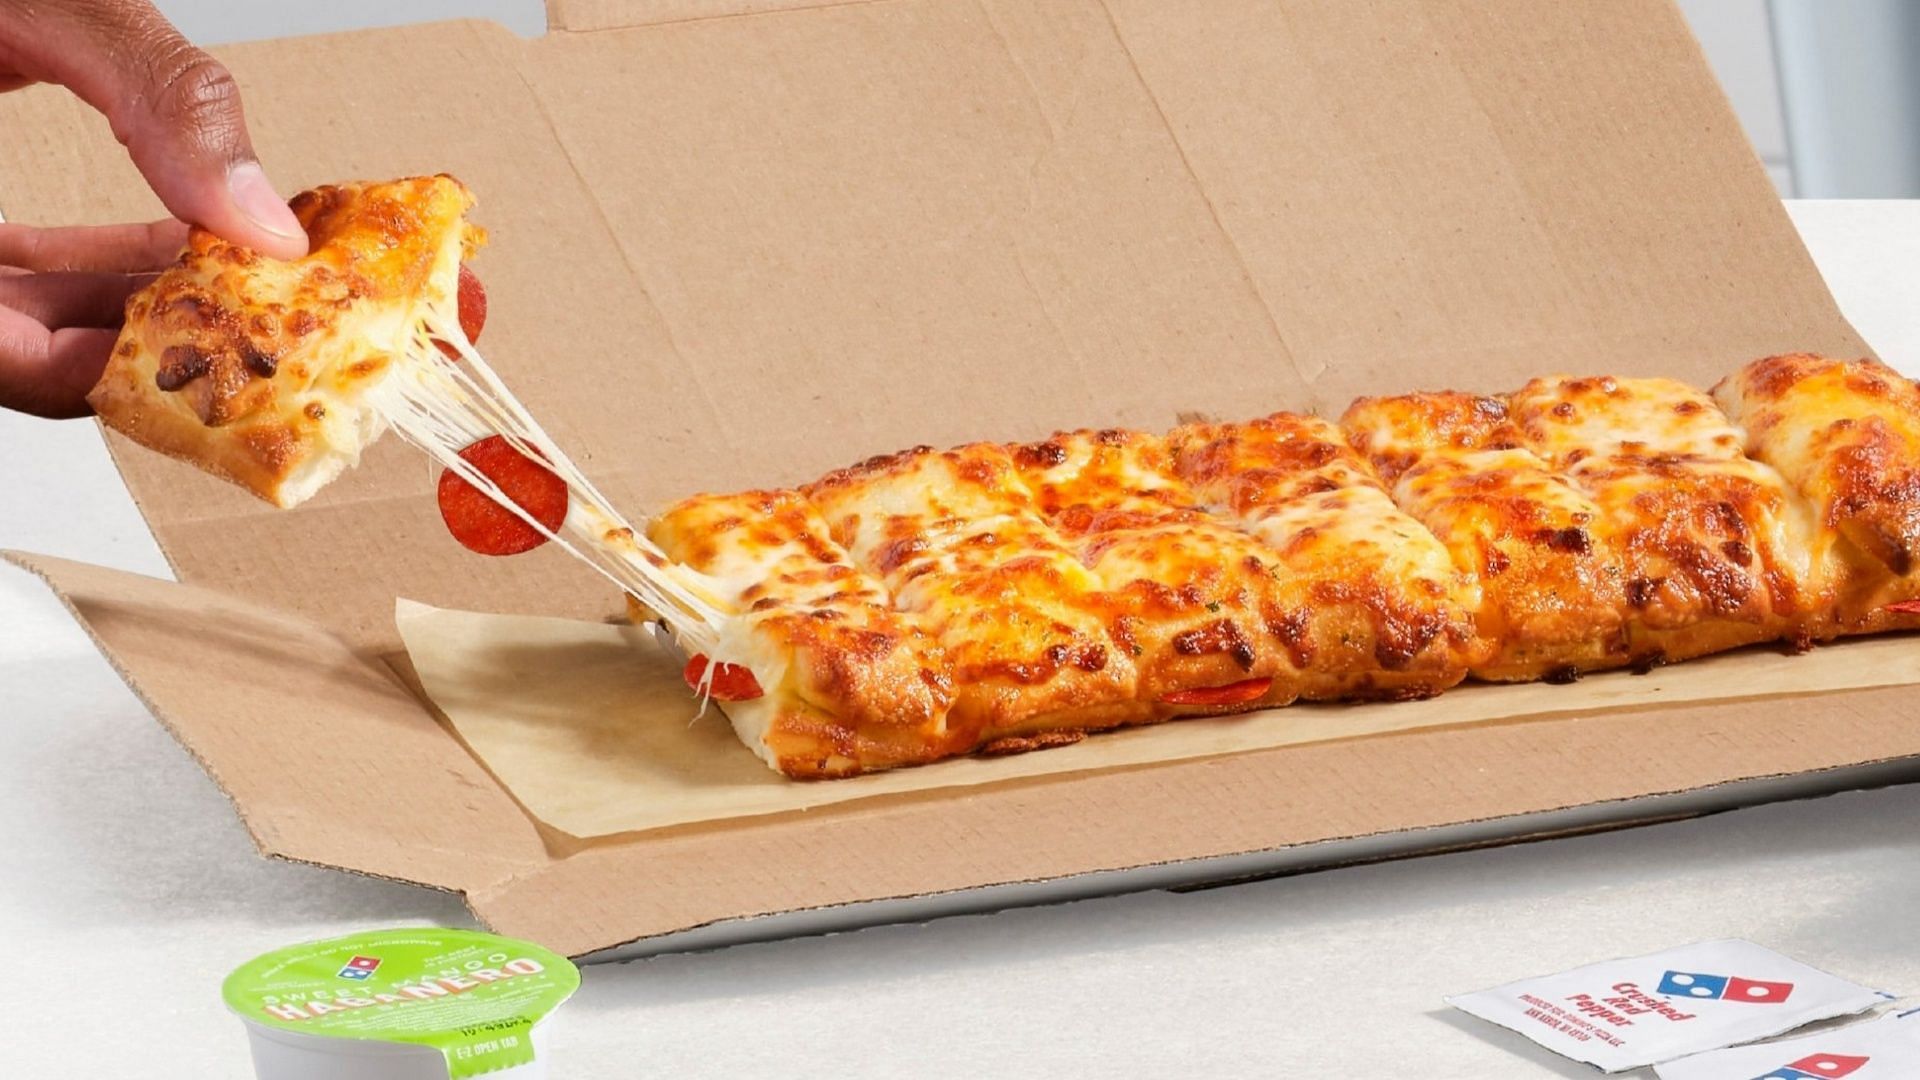 Domino’s introduces Pepperoni Stuffed Cheesy Bread nationwide